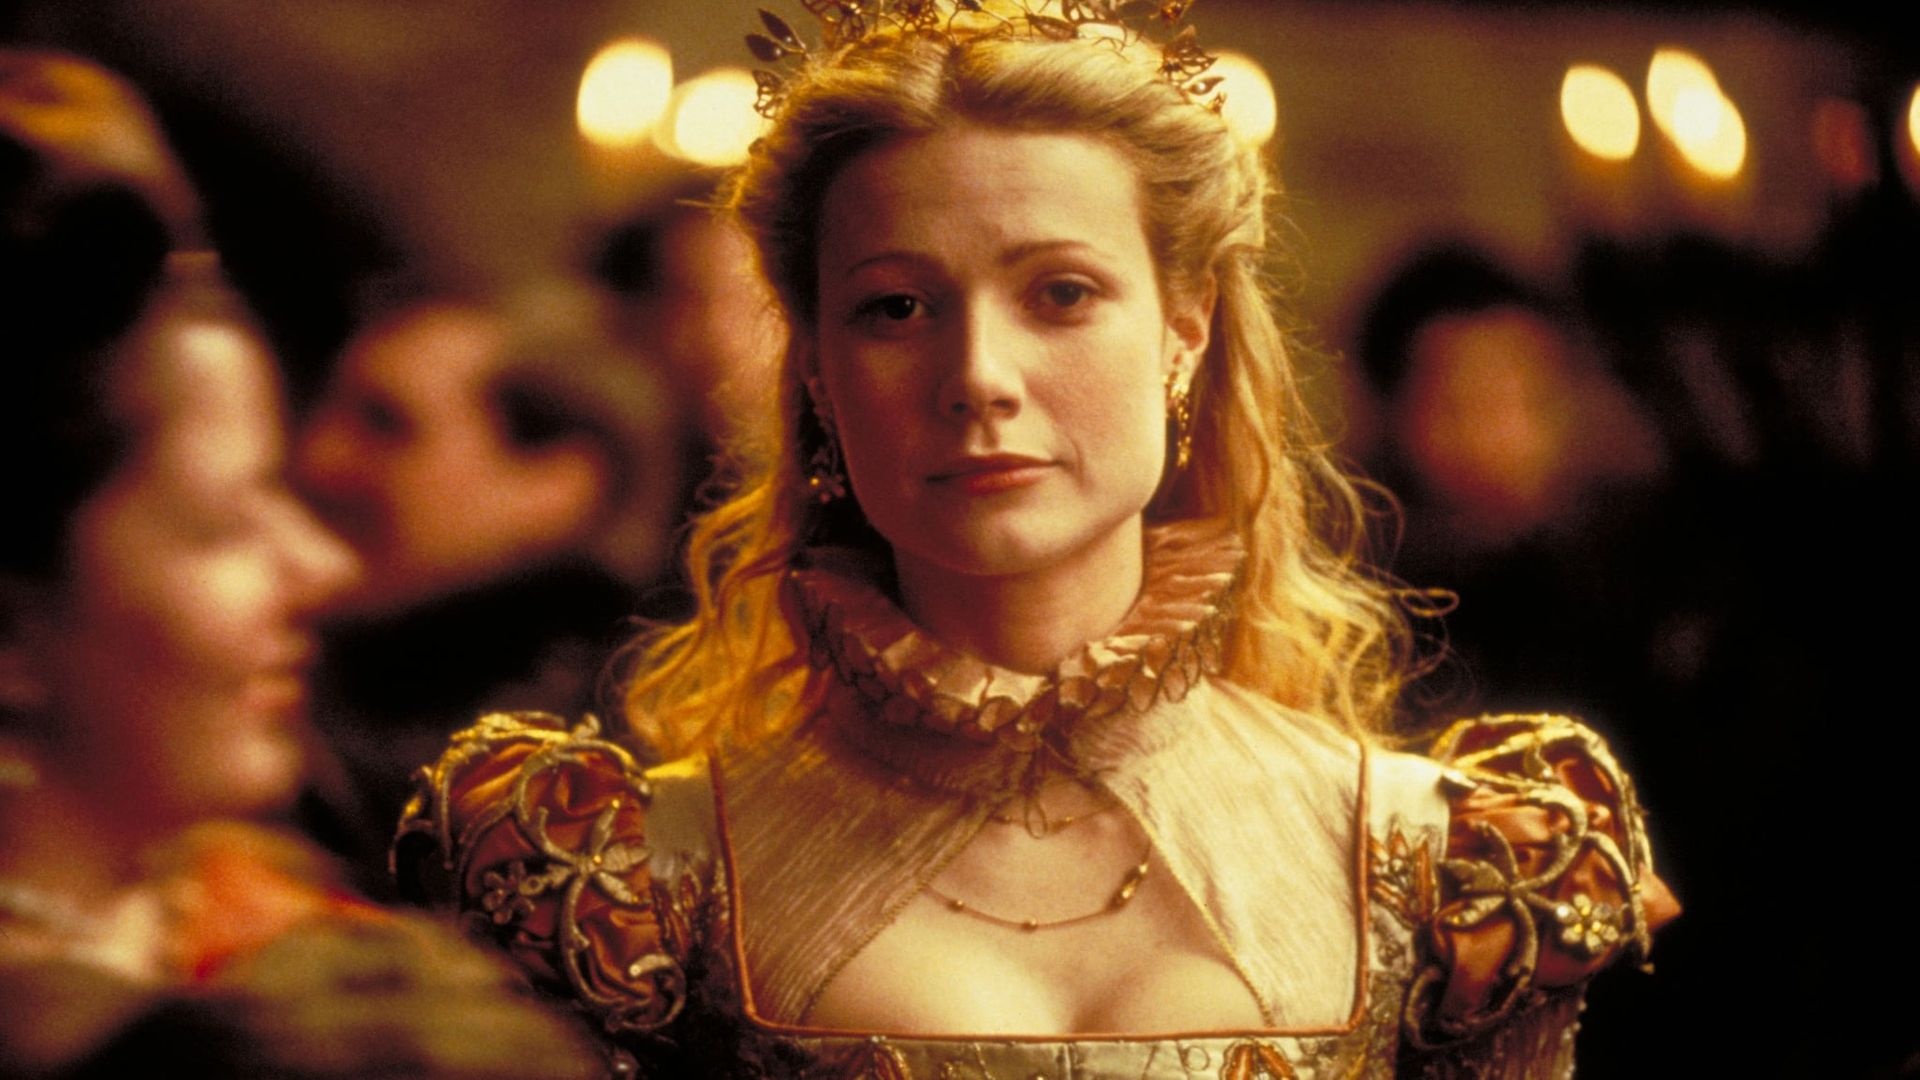 Shakespeare in Love, Streaming options, Romantic comedy, Historical fiction, 1920x1080 Full HD Desktop